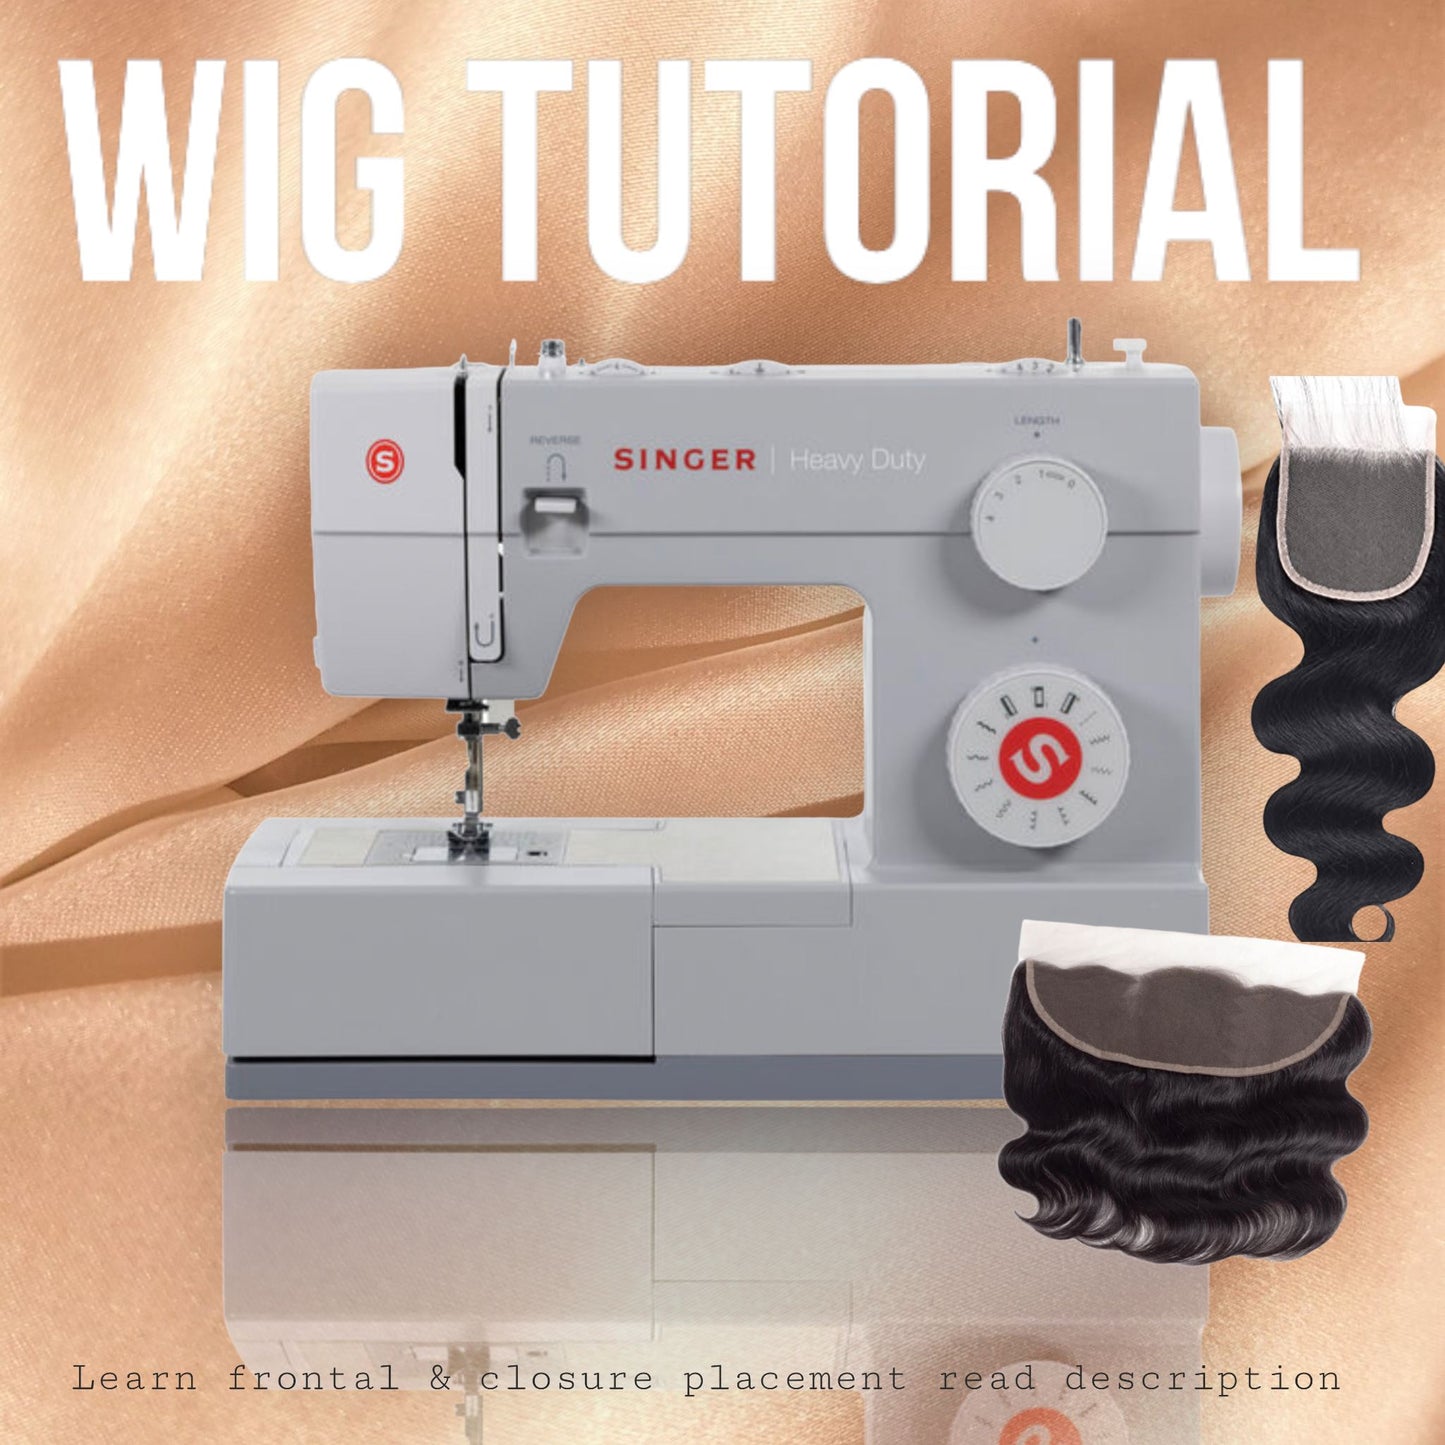 Learn how to make your wig tutorial video (digital download)